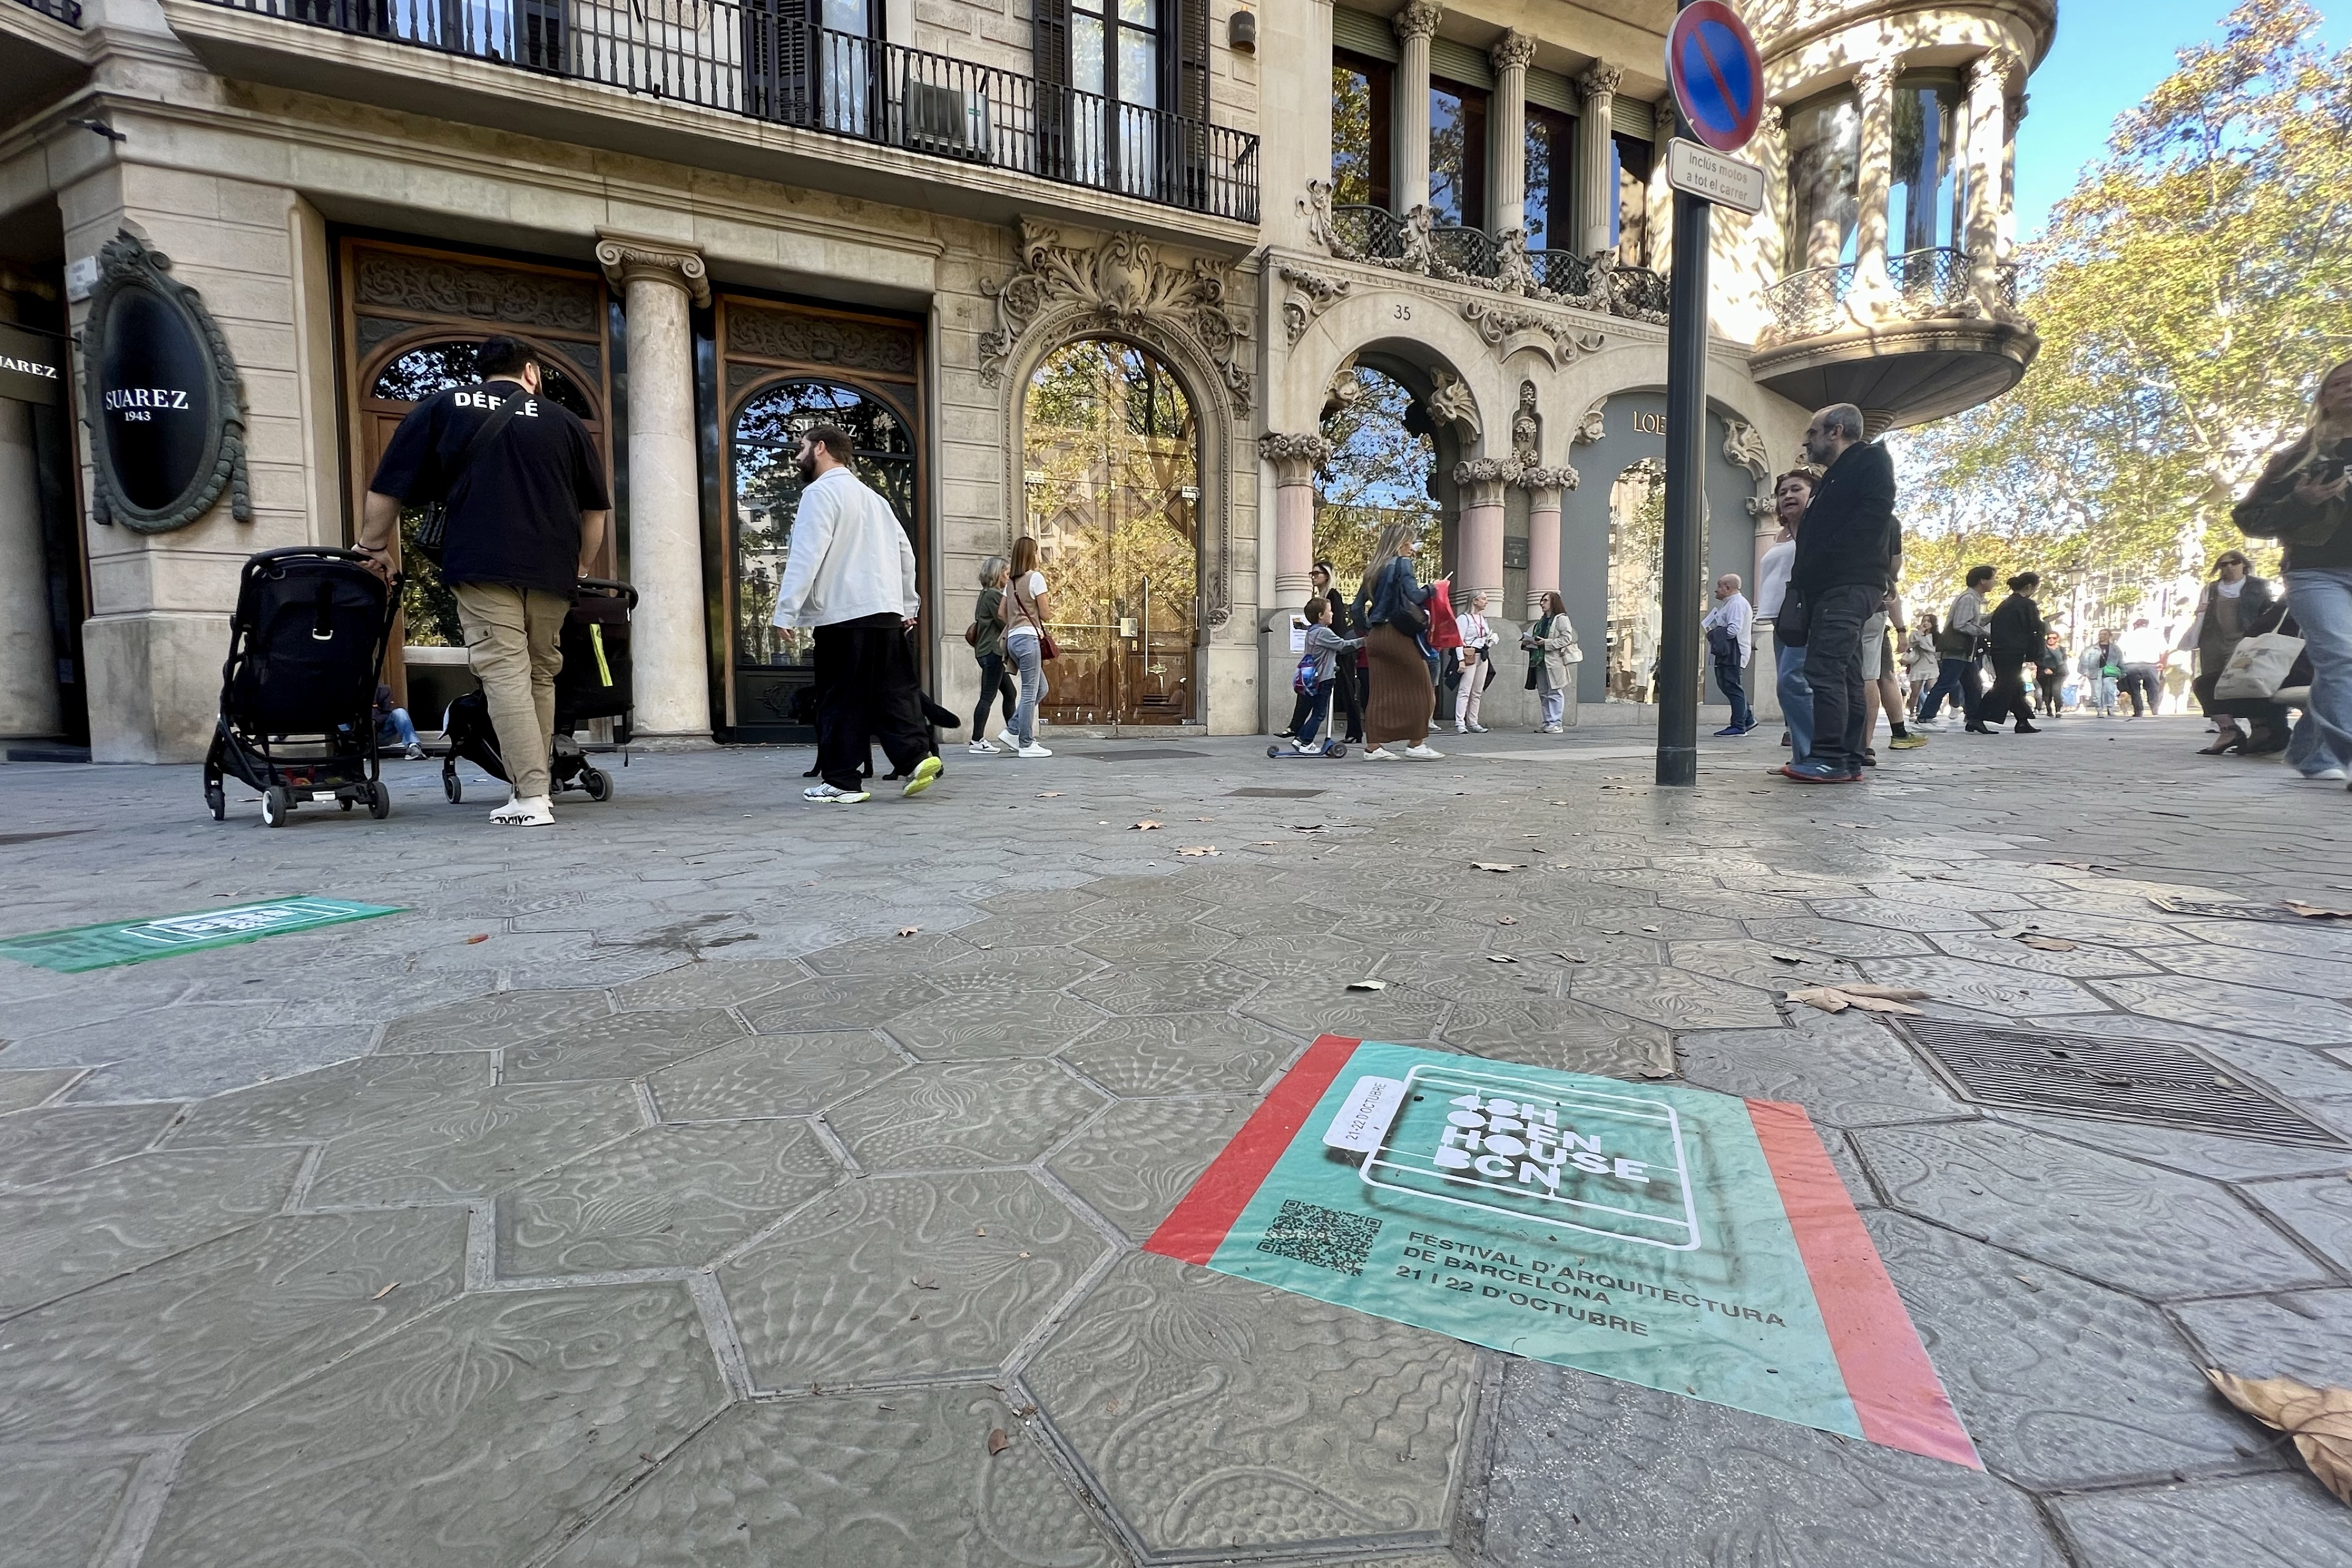 48H Open House logo printed on Barcelona's Passeig de Gràcia boulevard's floor in front of Catalan architect Lluís Domènech i Montaner's Lleó Morera house